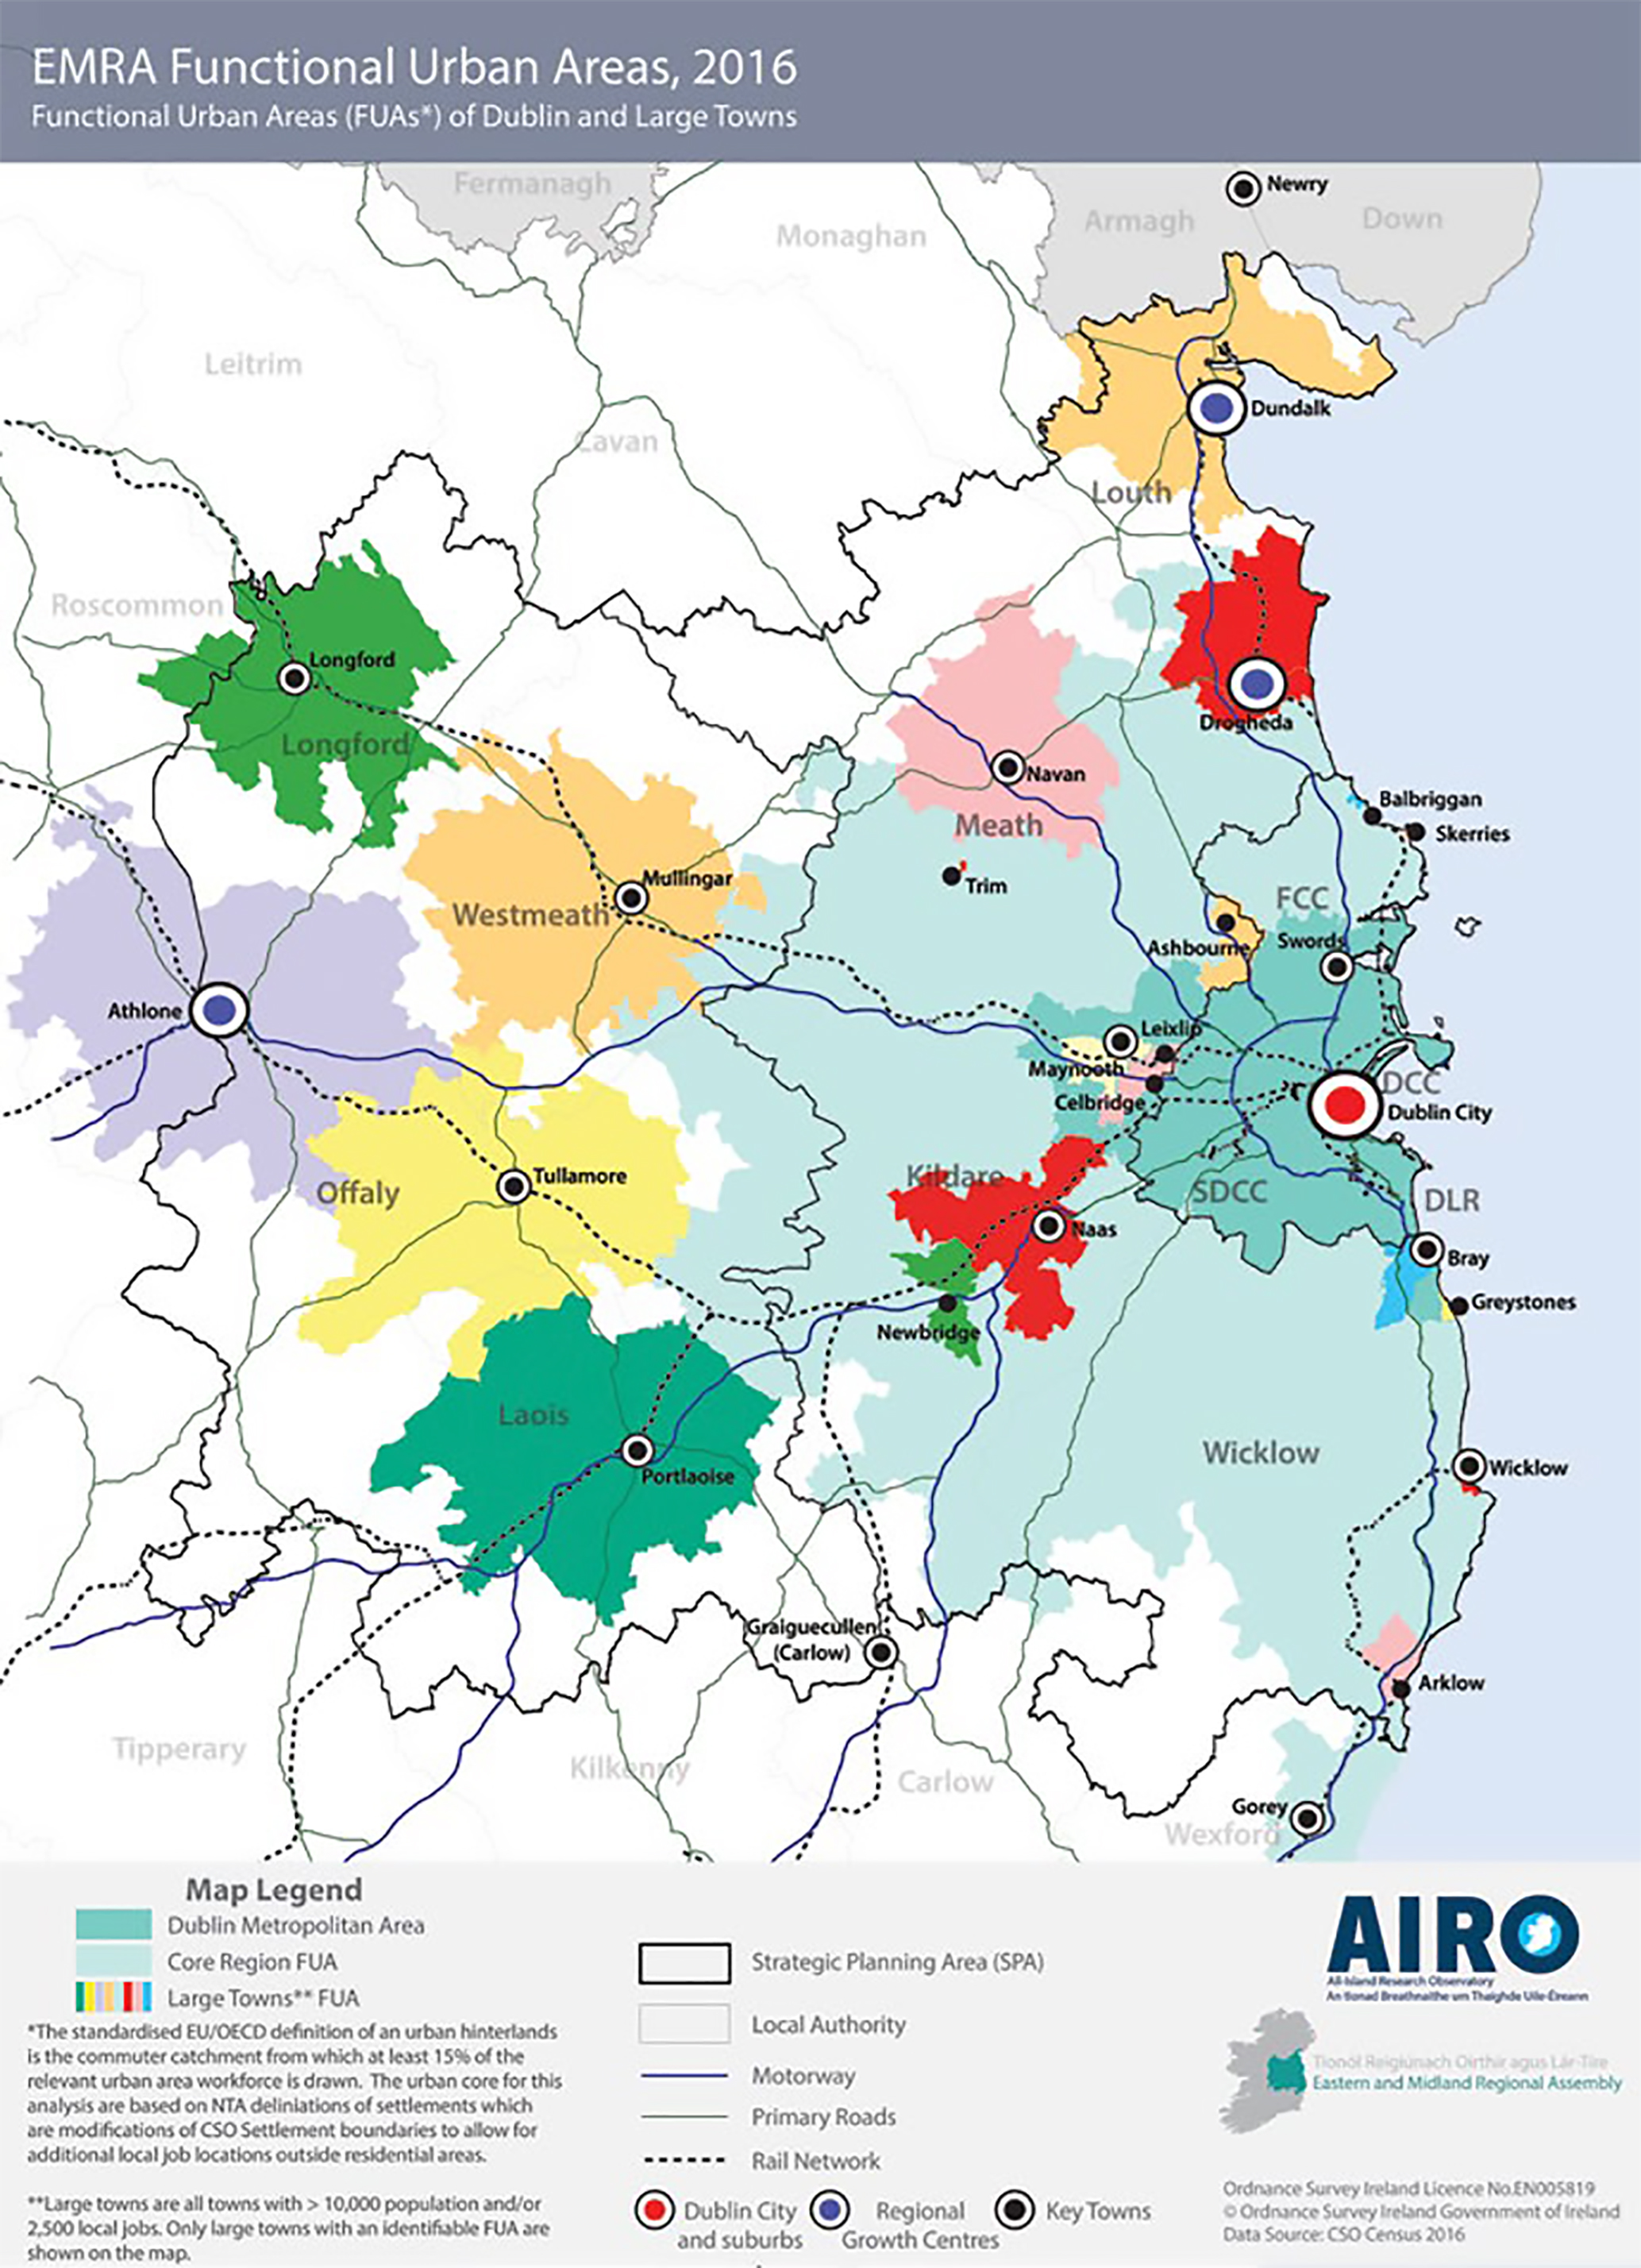 Figure 2.7: Functional Urban Areas, Dublin and Large Towns CSO 2016